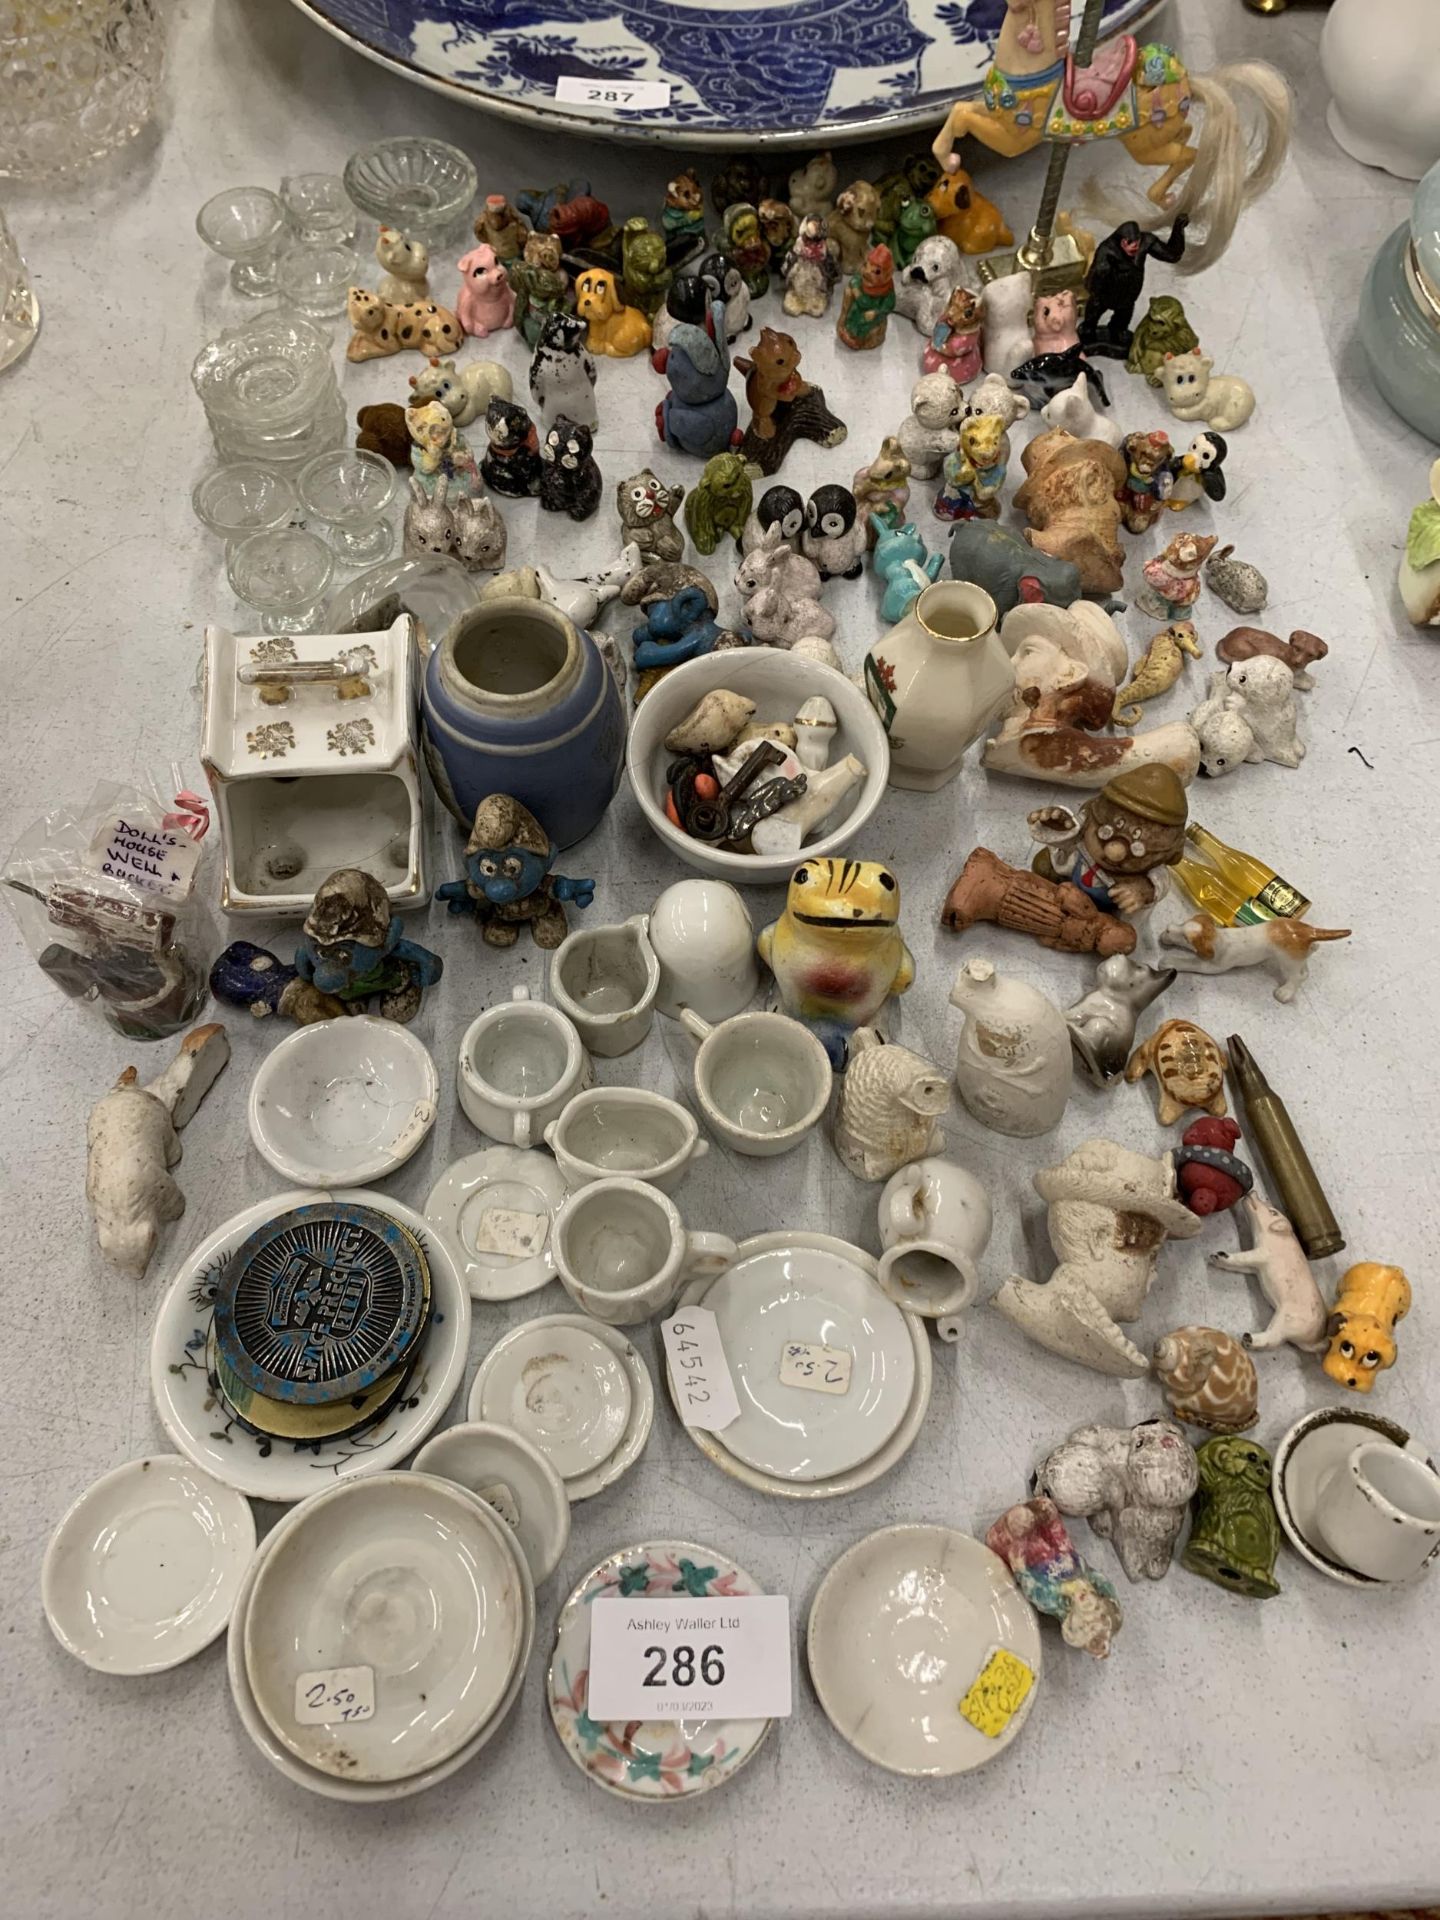 A LARGE QUANTITY OF MINIATURE ITEMS TO INCLUDE PLATES, ANIMAL FIGURES, GLASSWARE, ETC